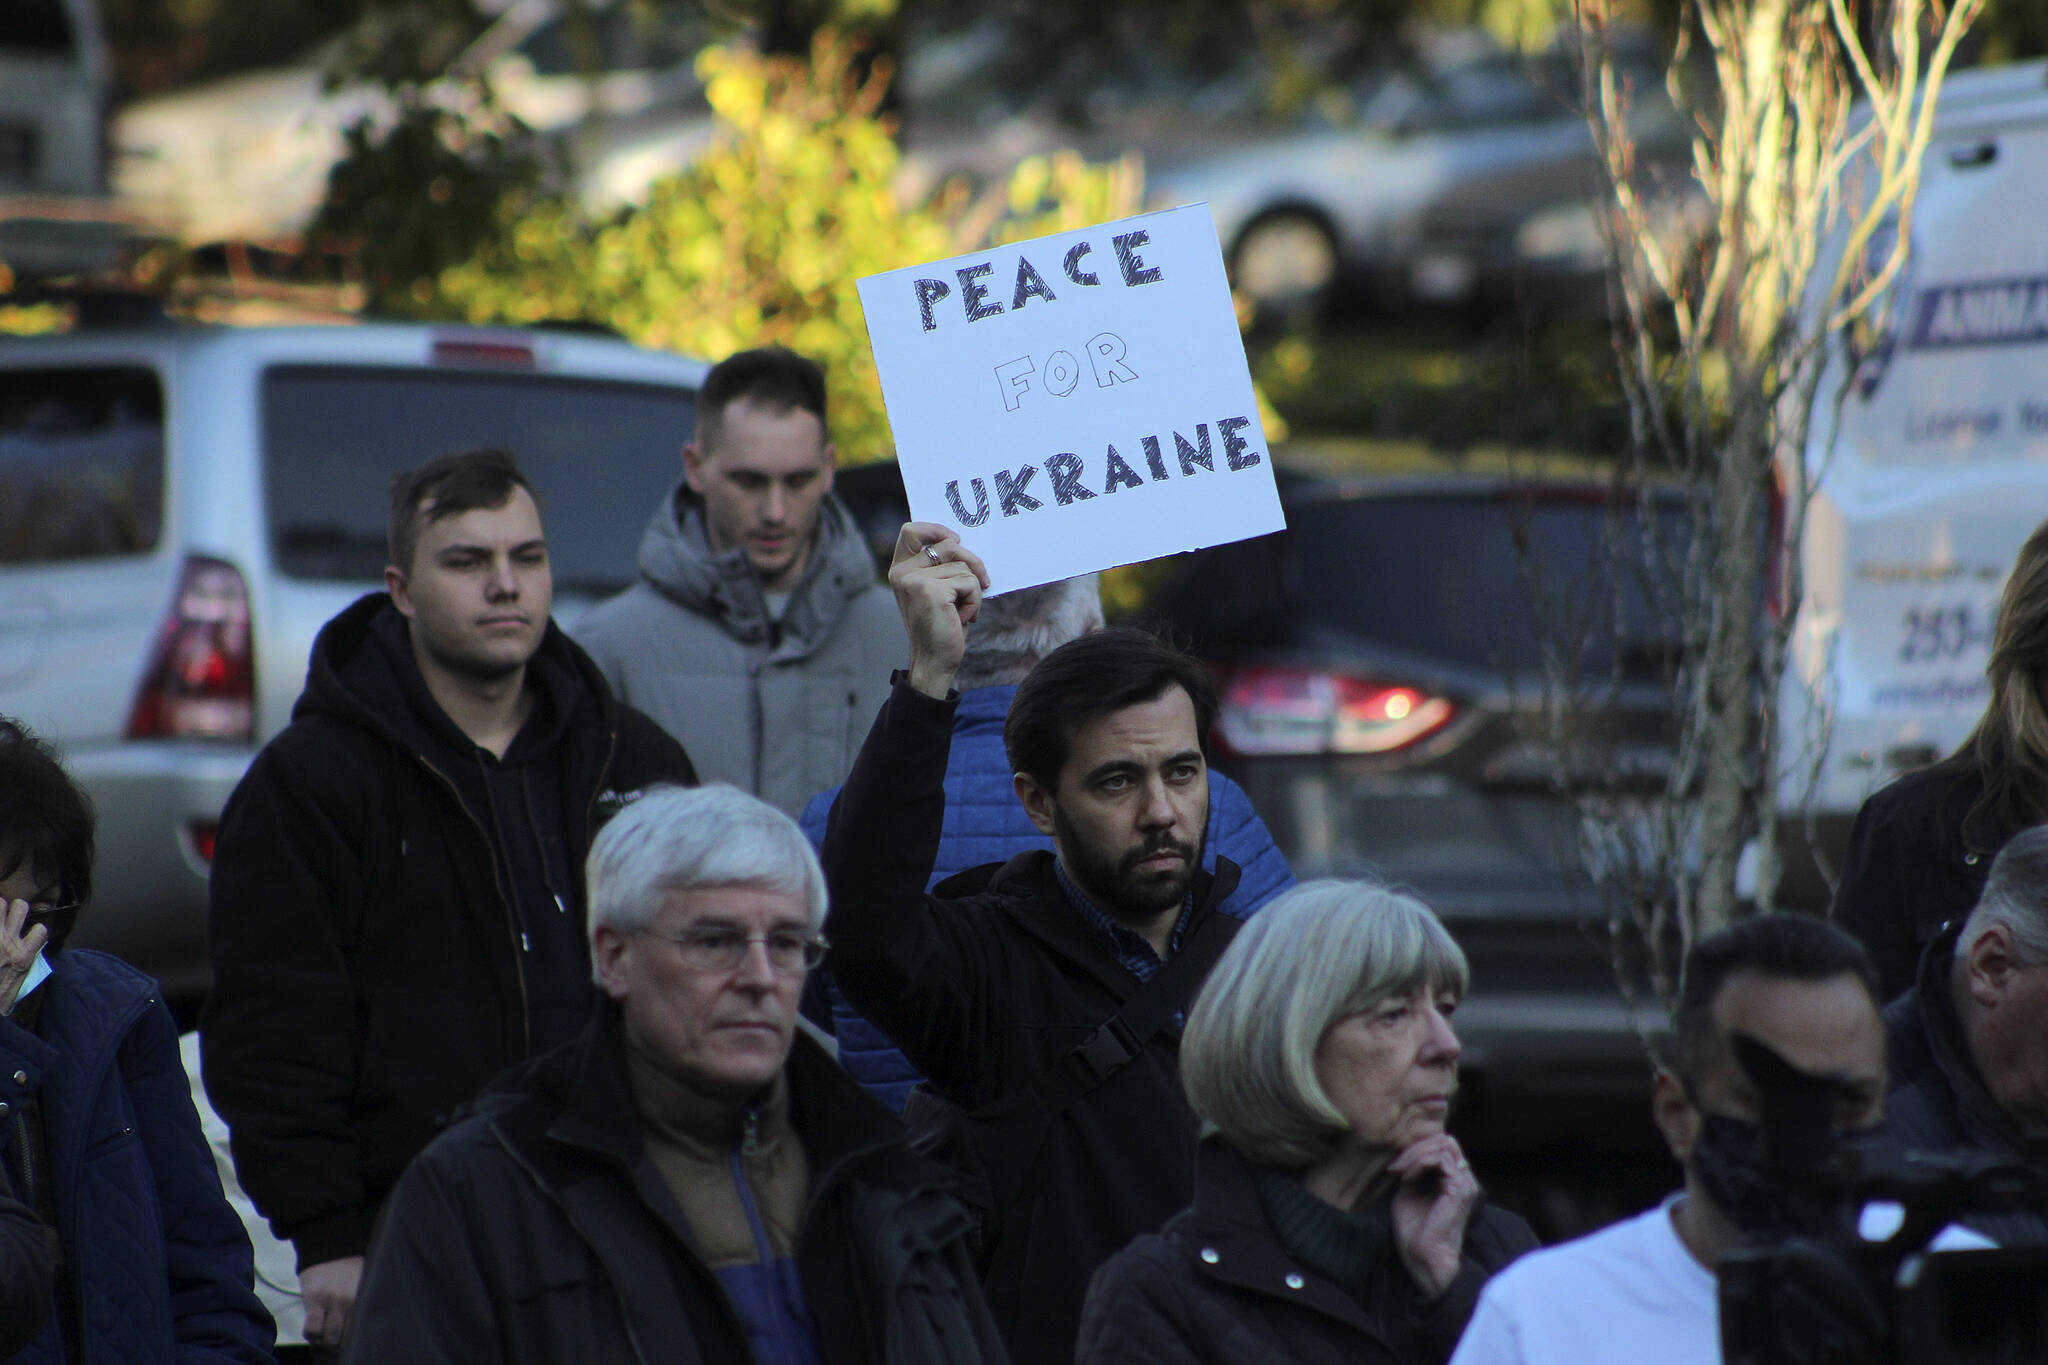 Igor Soloydenko, who said he identifies as Russian, holds a sign urging “Peace for Ukraine” at a ceremony Feb. 25 in Federal Way. Soloydenko said: “There’s just so much shame. I feel helpless in the way I cannot change anything in my home country. It was unimaginable that Russia would do such a thing.” Olivia Sullivan/Sound Publishing